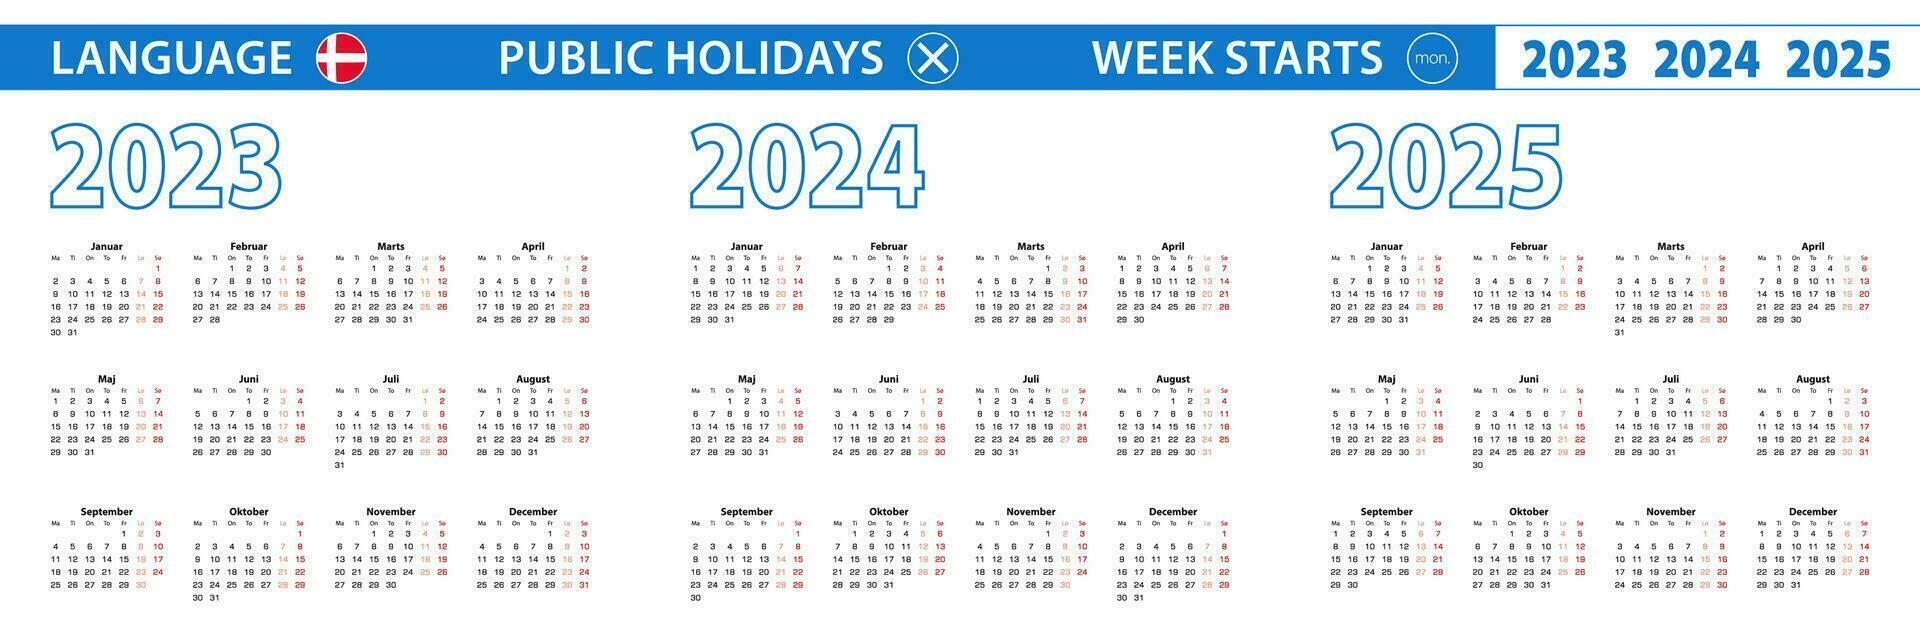 Simple calendar template in Danish for 2023, 2024, 2025 years. Week starts from Monday. vector